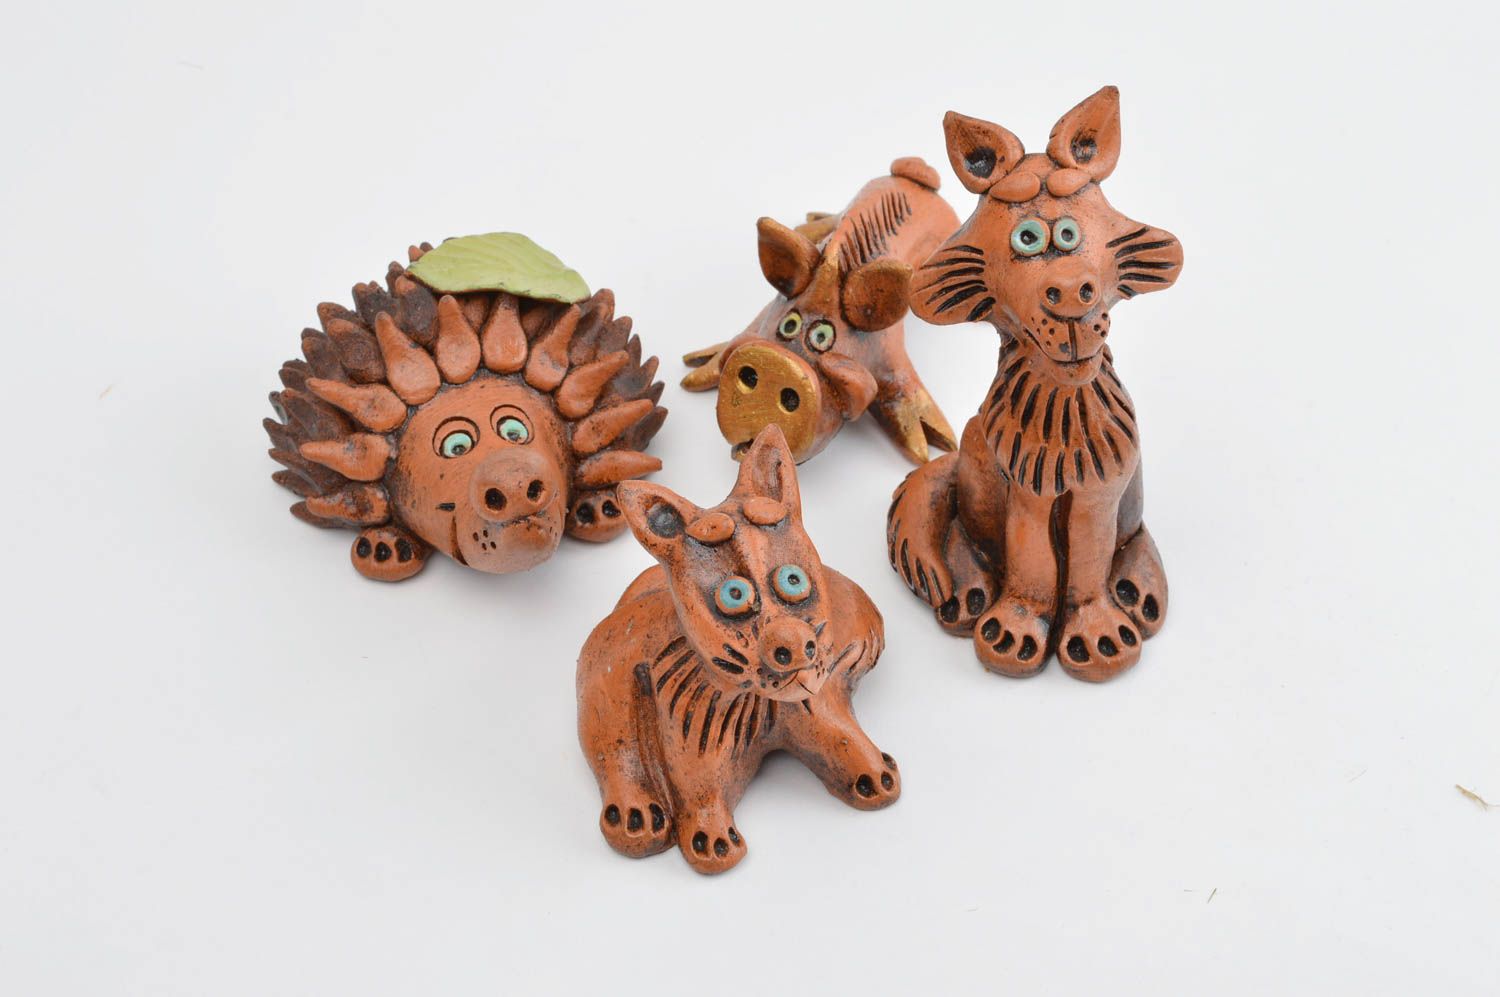 Homemade animal figurines 4 ceramic figurines for decorative use only  photo 2